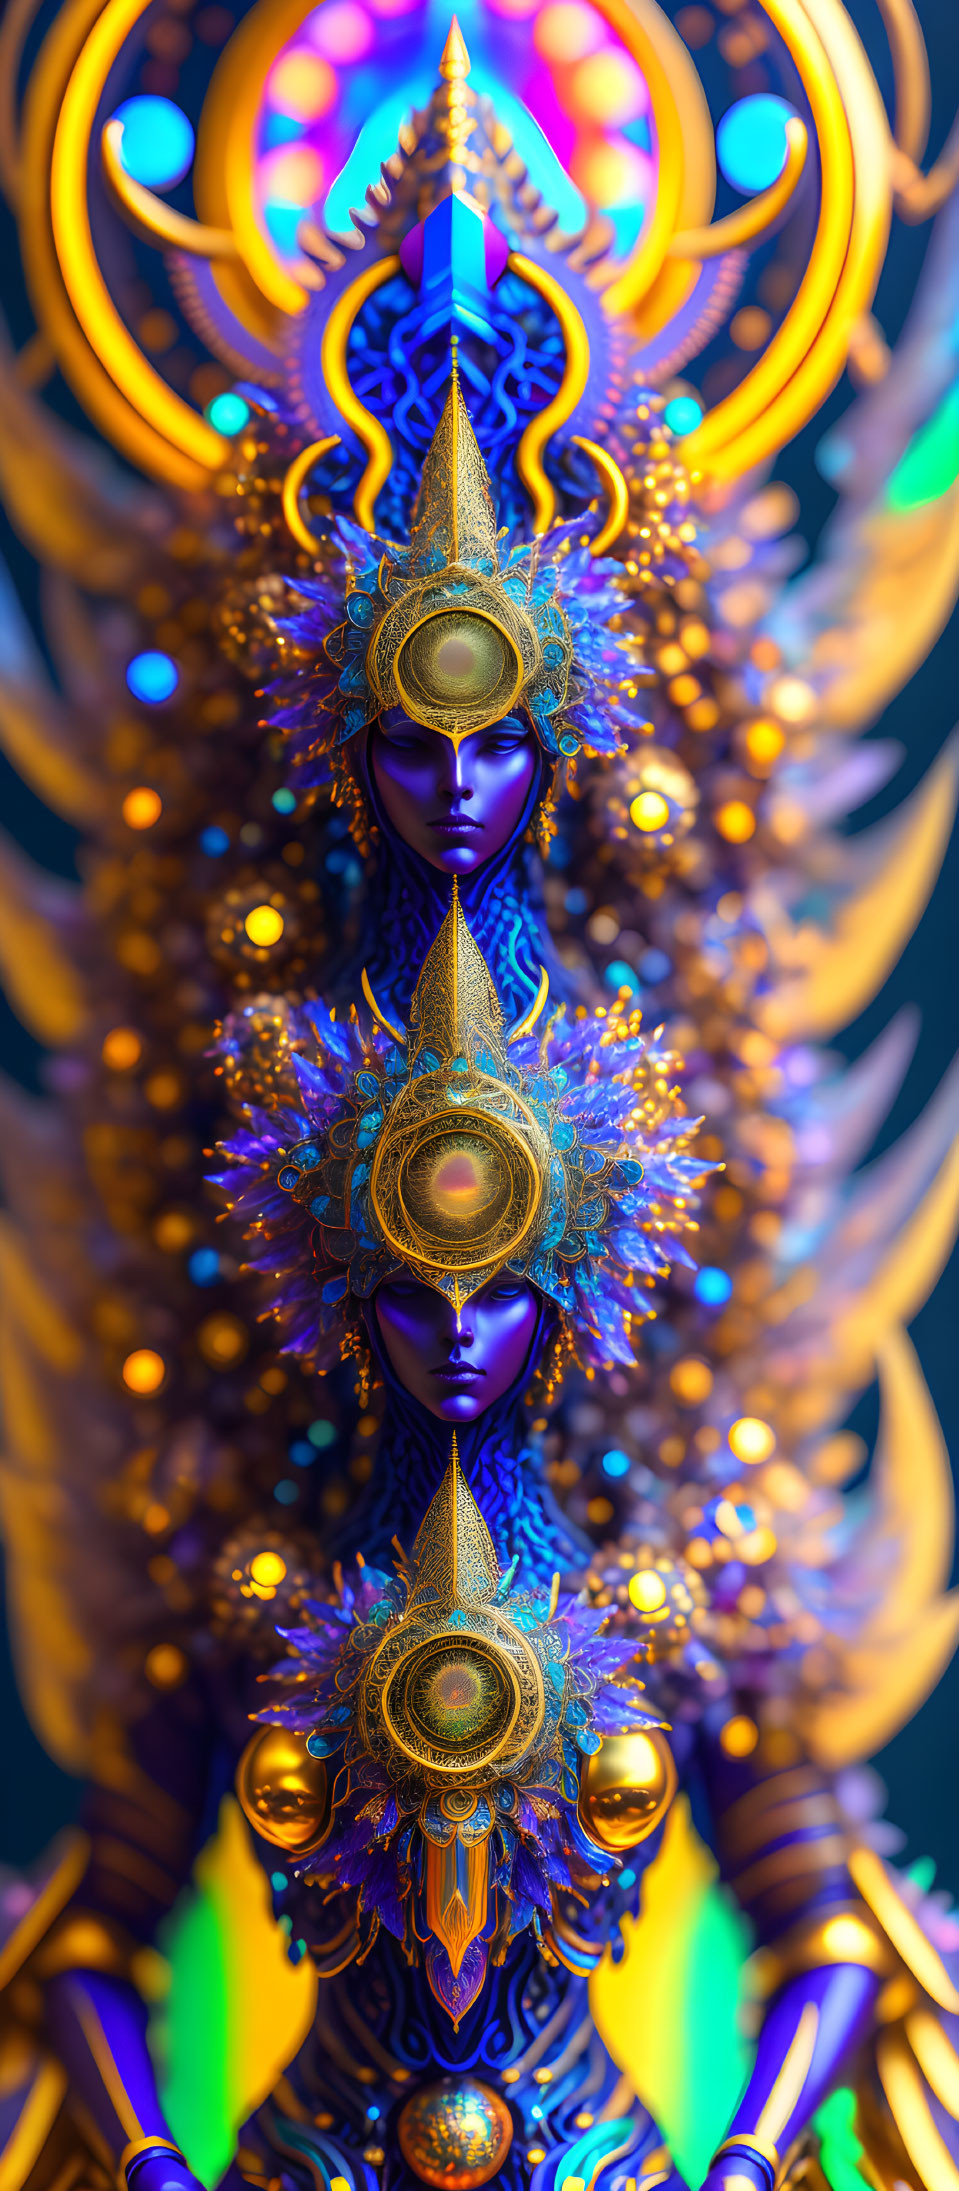 Intricate gold and blue multi-faced entity artwork